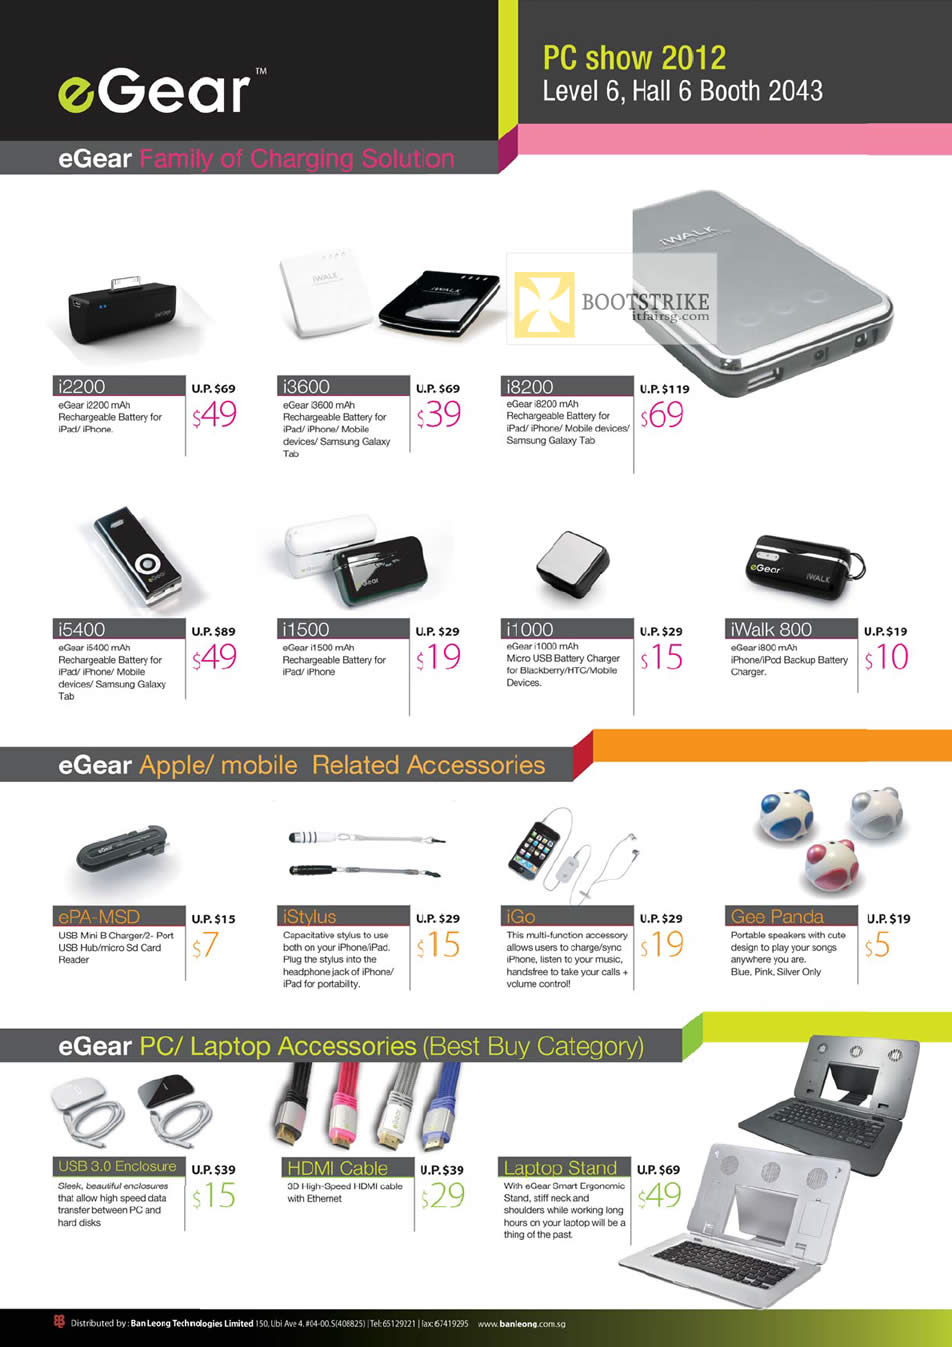 PC SHOW 2012 price list image brochure of Ban Leong EGear Battery Charger I2200, I3600, I8200, I5400, I1500, I1000, IWalk 800, IStylus, HDMI Cable, Laptop Stand